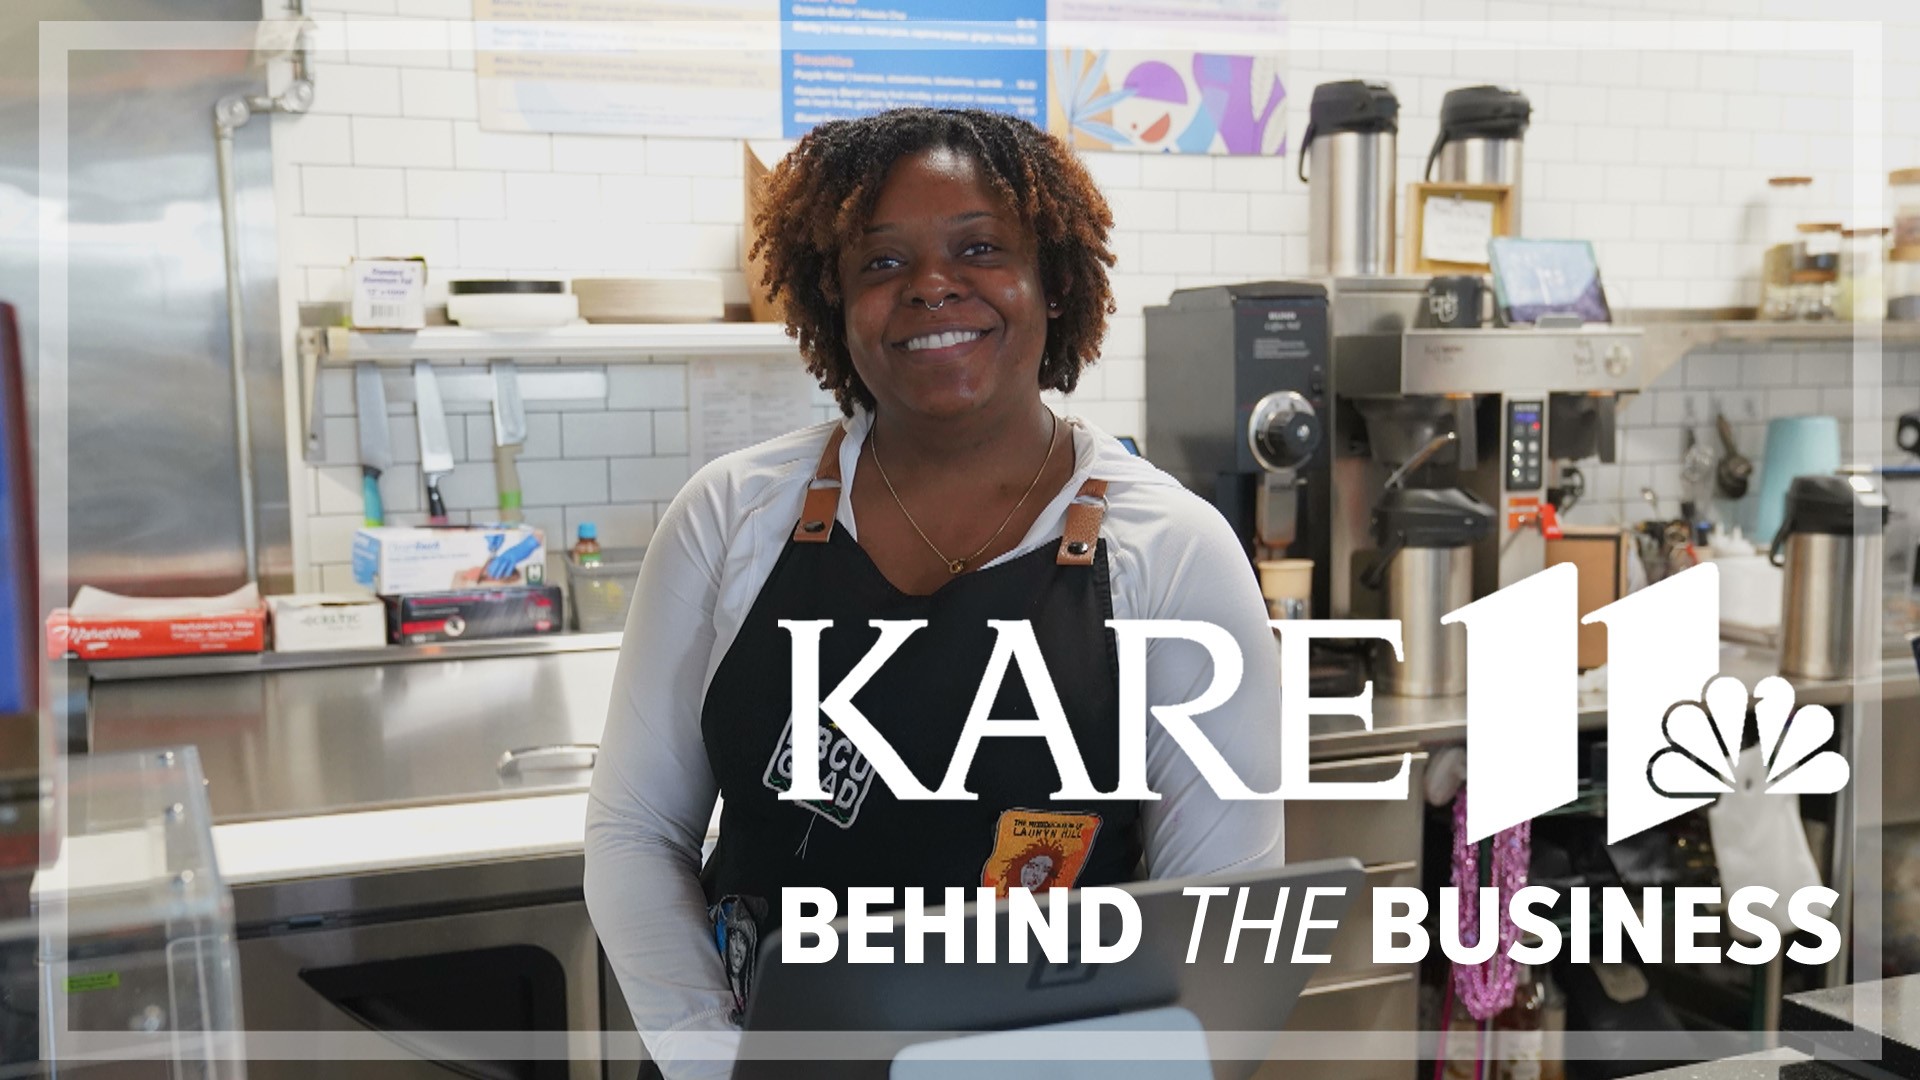 Shaunie Grigsby's background in nonprofit work and youth development inspired her to open a social enterprise coffee shop in St. Paul's Frogtown neighborhood.